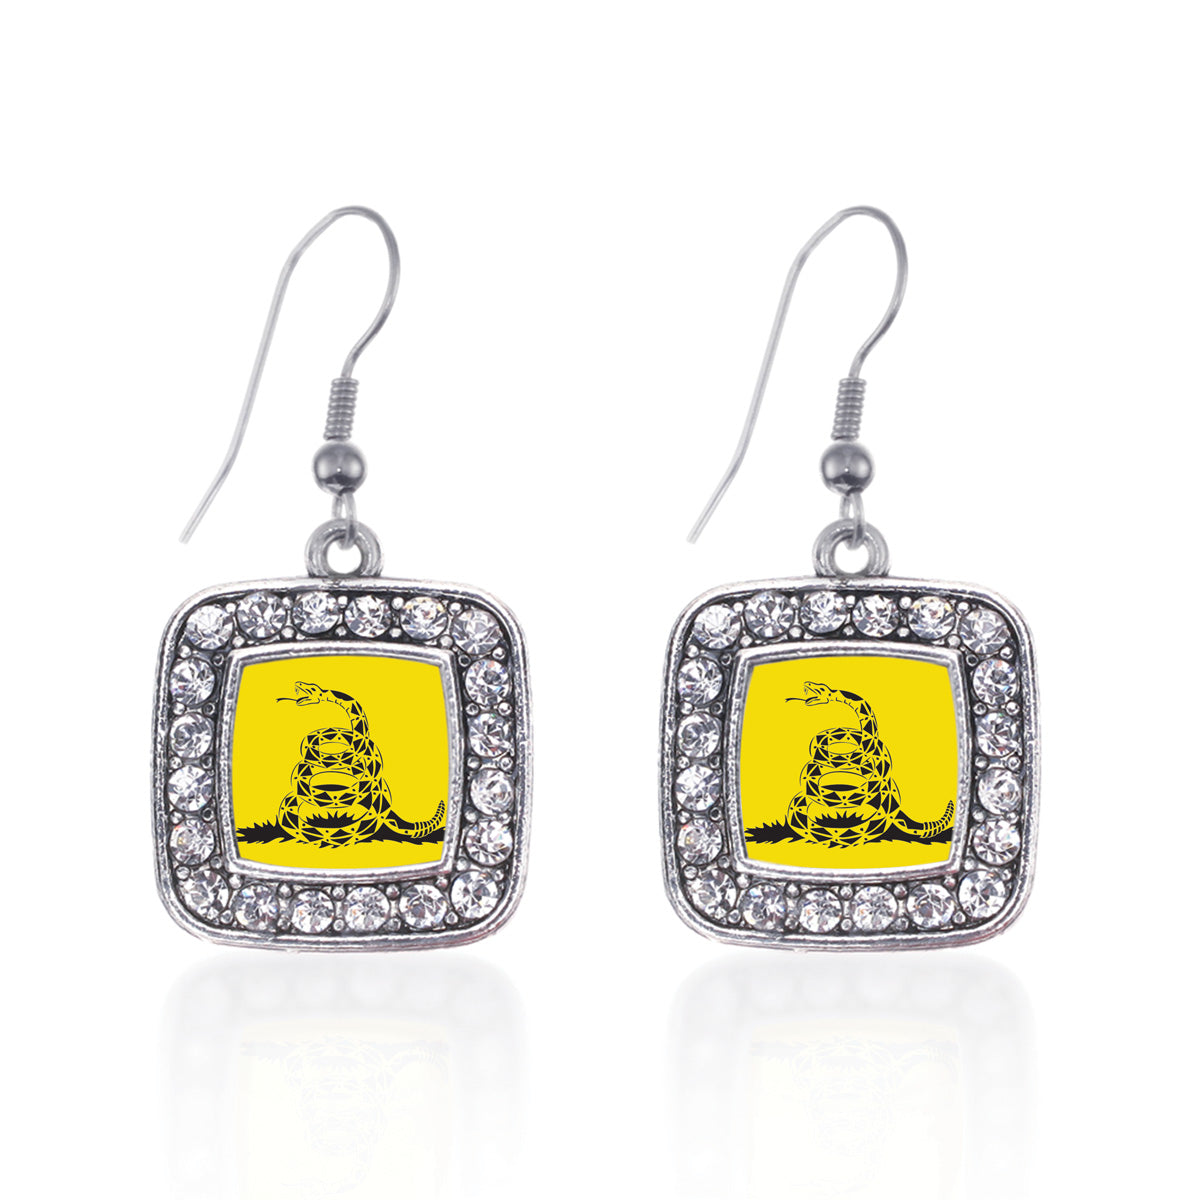 Silver Don't Tread on Me Square Charm Dangle Earrings